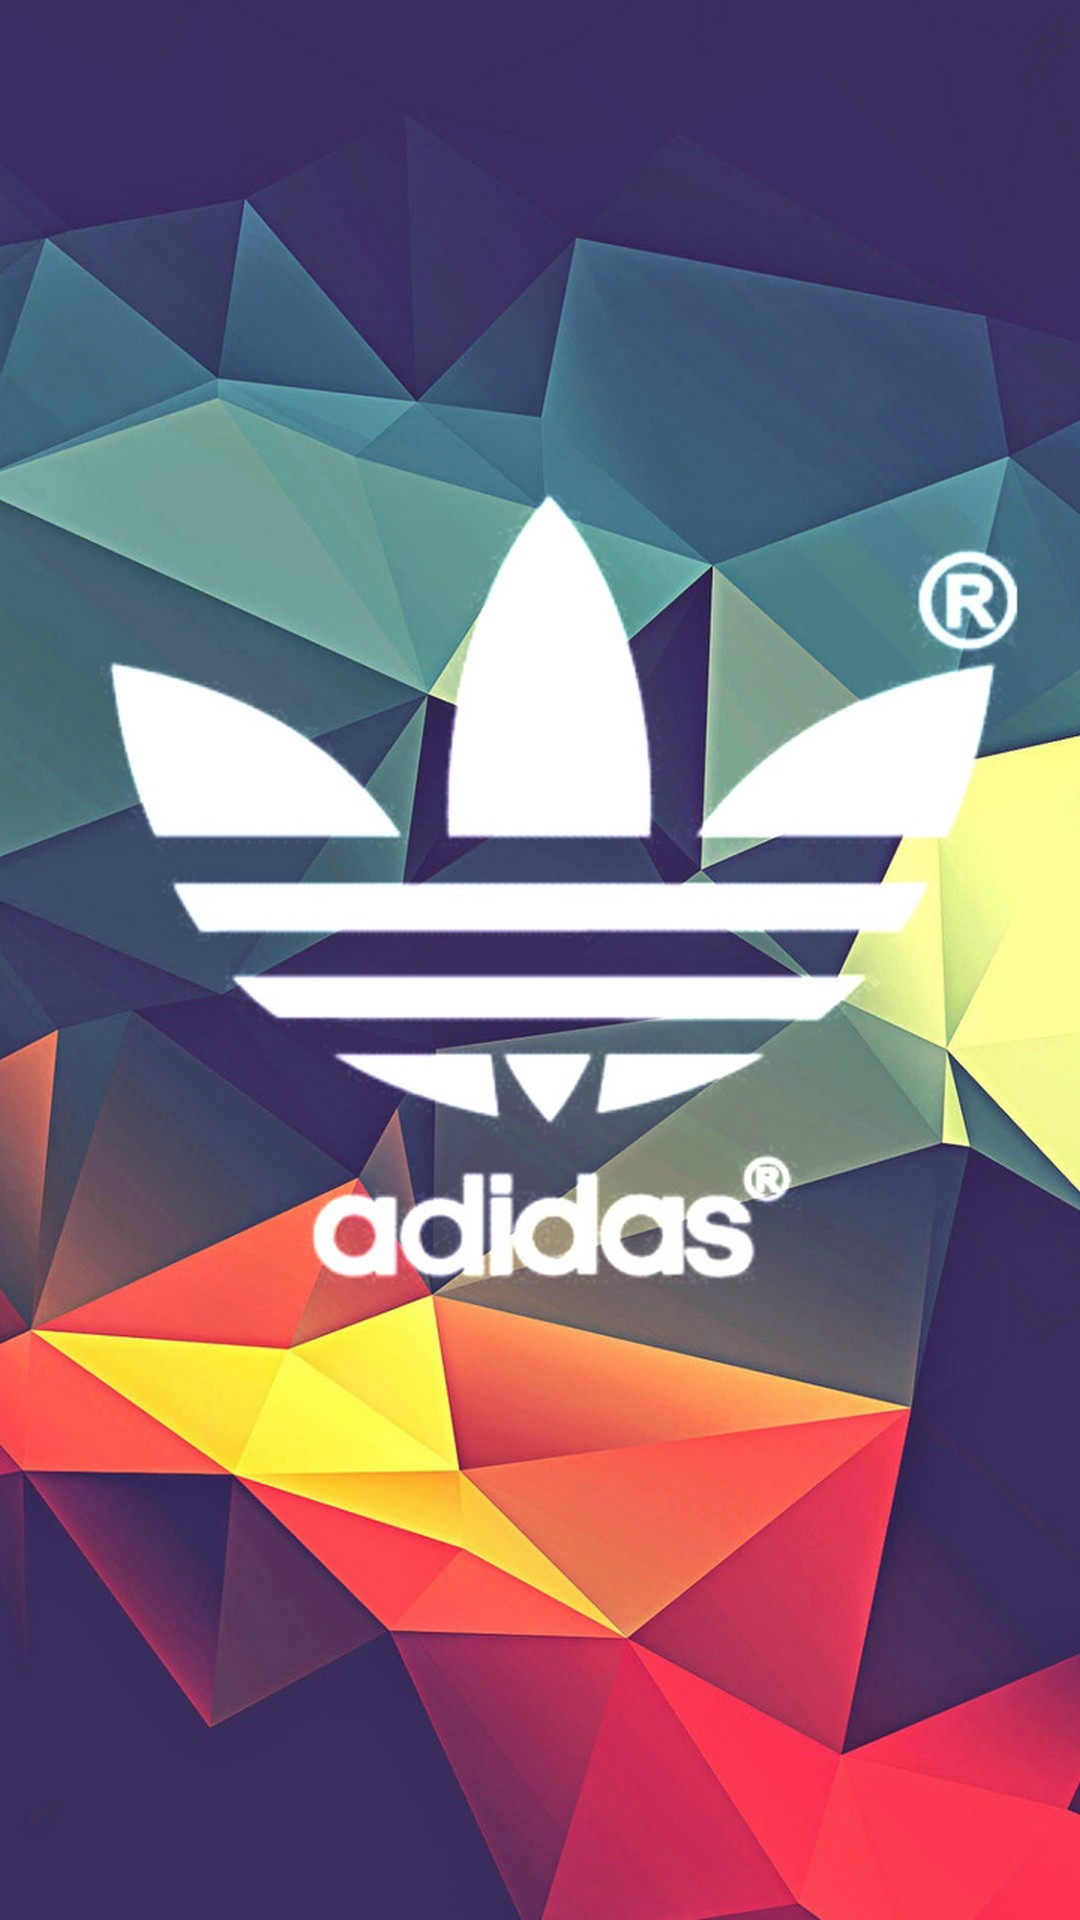 Wallpaper Adidas Android With high-resolution 1080X1920 pixel. You can use this wallpaper for your Android backgrounds, Tablet, Samsung Screensavers, Mobile Phone Lock Screen and another Smartphones device